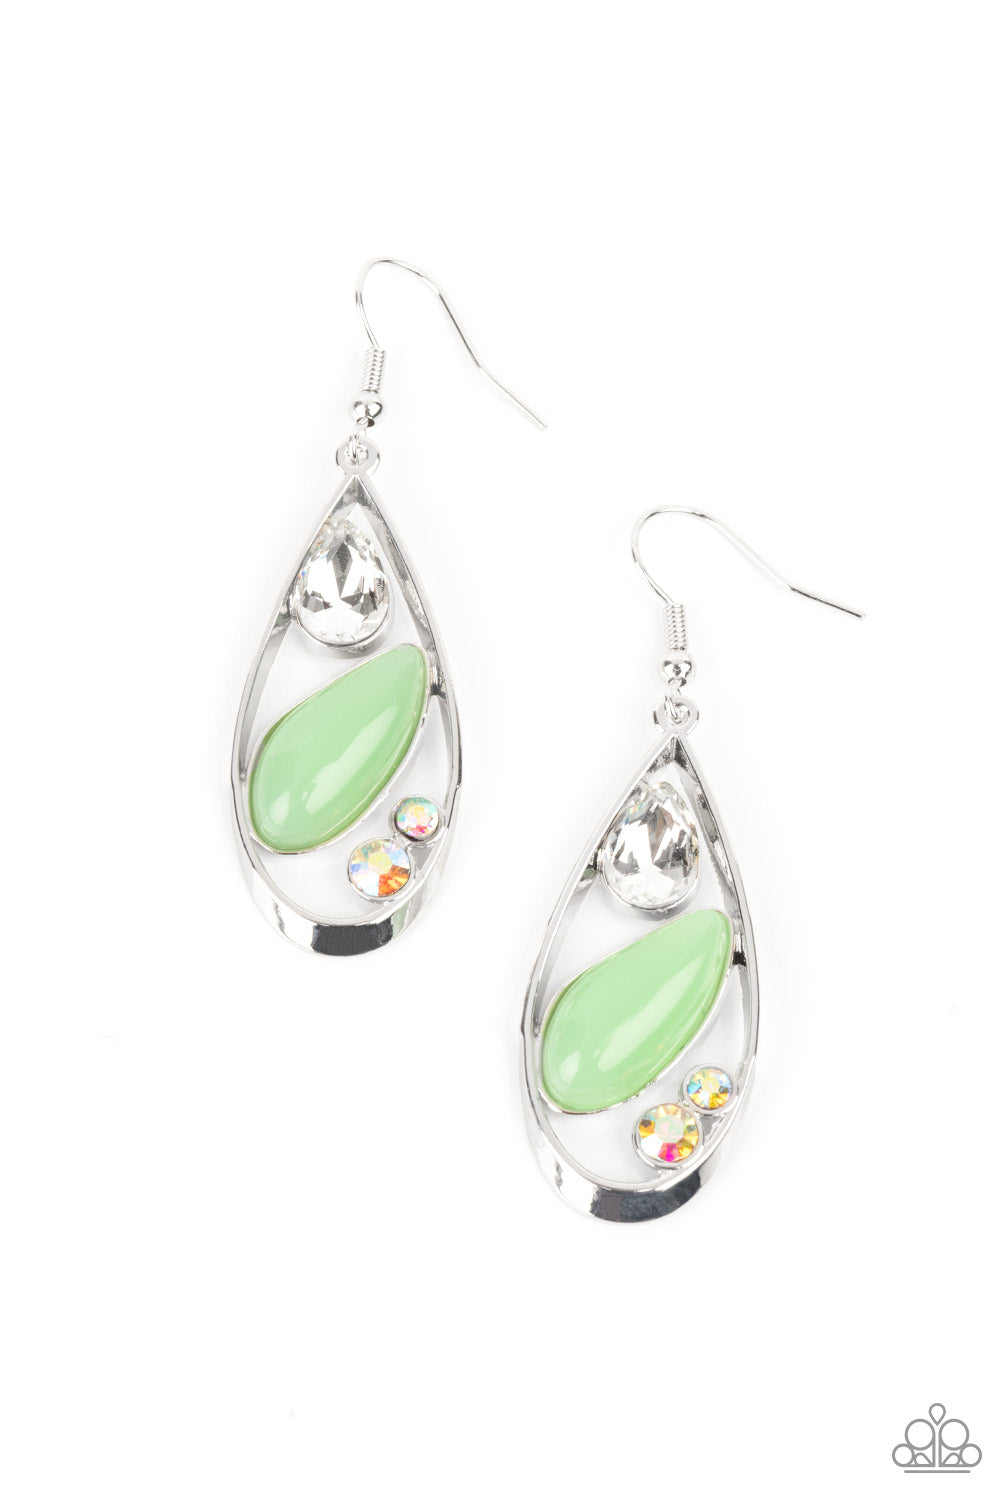 Harmonious Harbors Green Earring - Paparazzi Accessories.  A silver teardrop frame embraces a collection of iridescent rhinestones and a milky Green Ash bead that is reminiscent of seashore finds. Earring attaches to a standard fishhook fitting.  ﻿﻿﻿All Paparazzi Accessories are lead free and nickel free!  Sold as one pair of earrings.